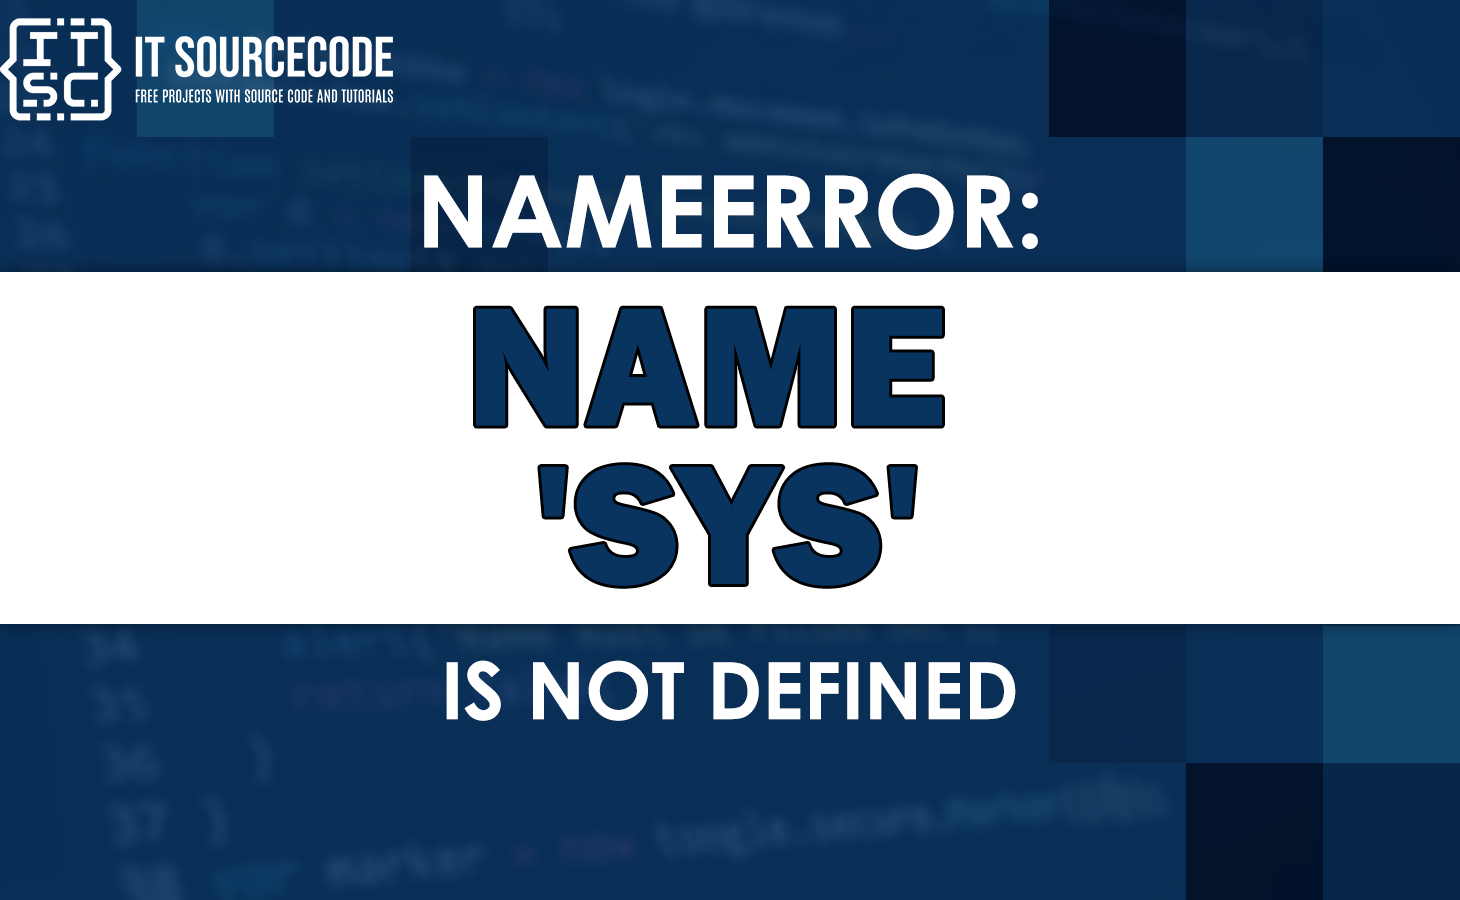 Nameerror: name 'sys' is not defined